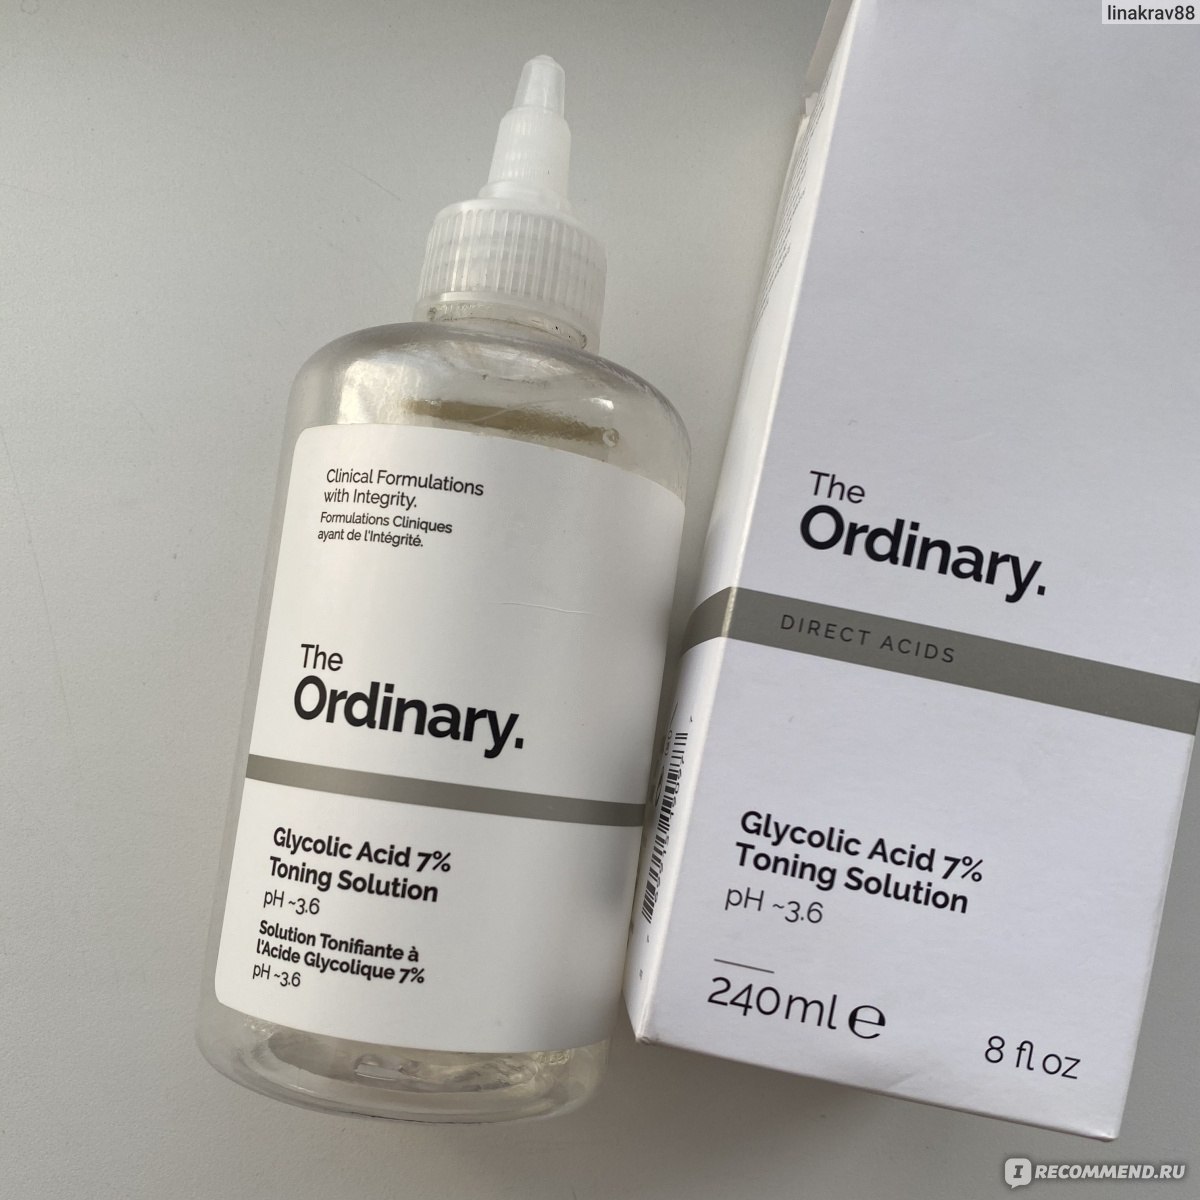 The ordinary glycolic 7 toning solution. Тонер the ordinary Glycolic acid 7. Гликолевый тоник 7% the ordinary – 240 мл. Тоник для лица the ordinary Glycolic acid 7% Toning solution. The ordinary acid 7 Toning solution.